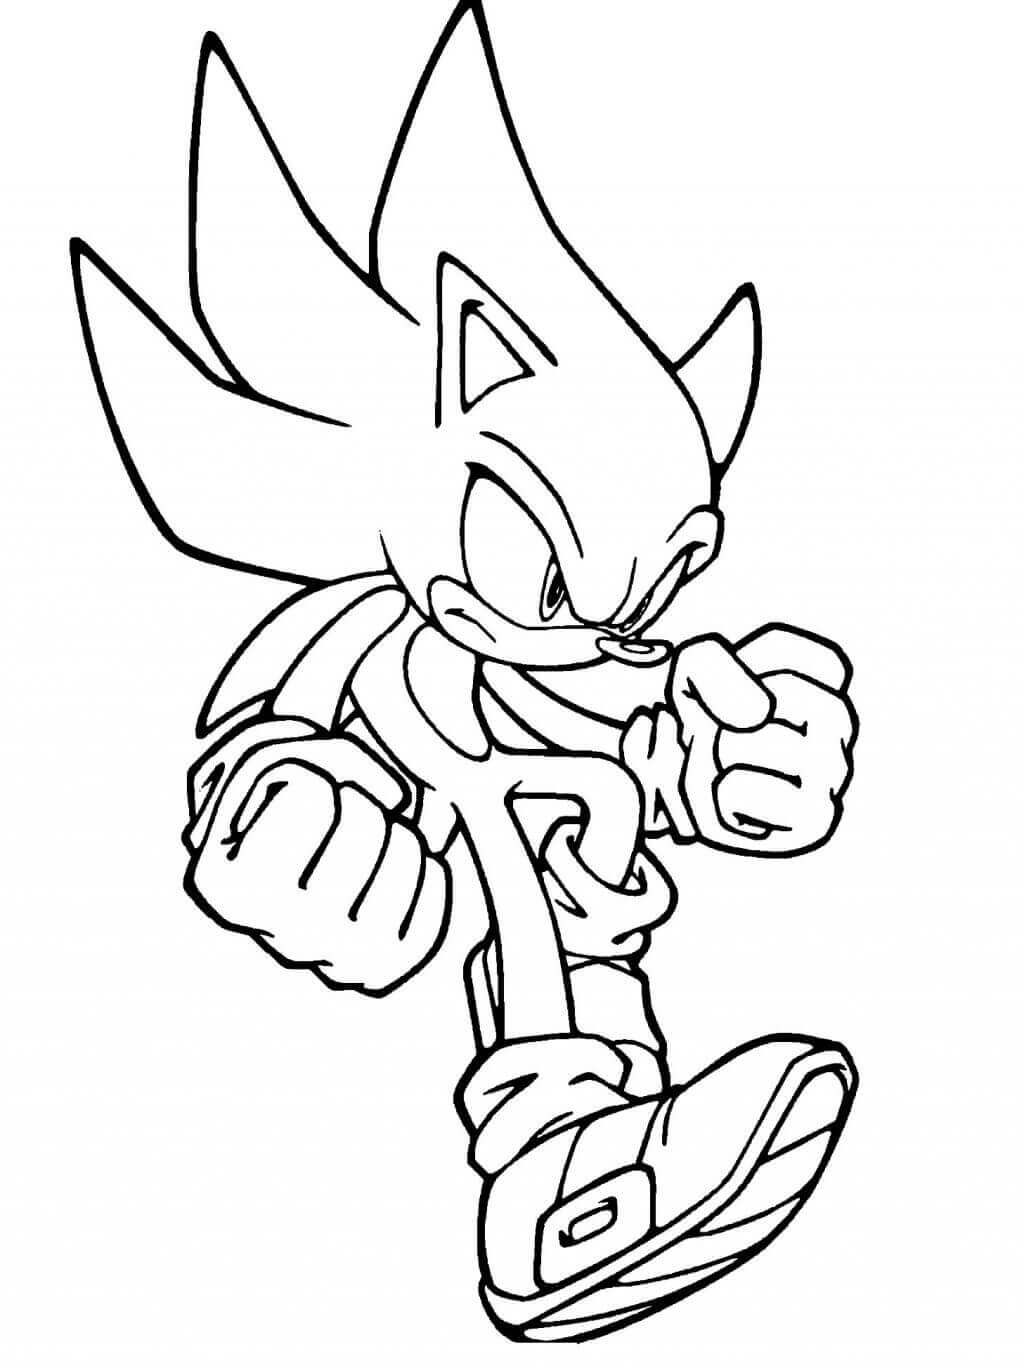 Download 30 Free Sonic The Hedgehog Coloring Pages Printable